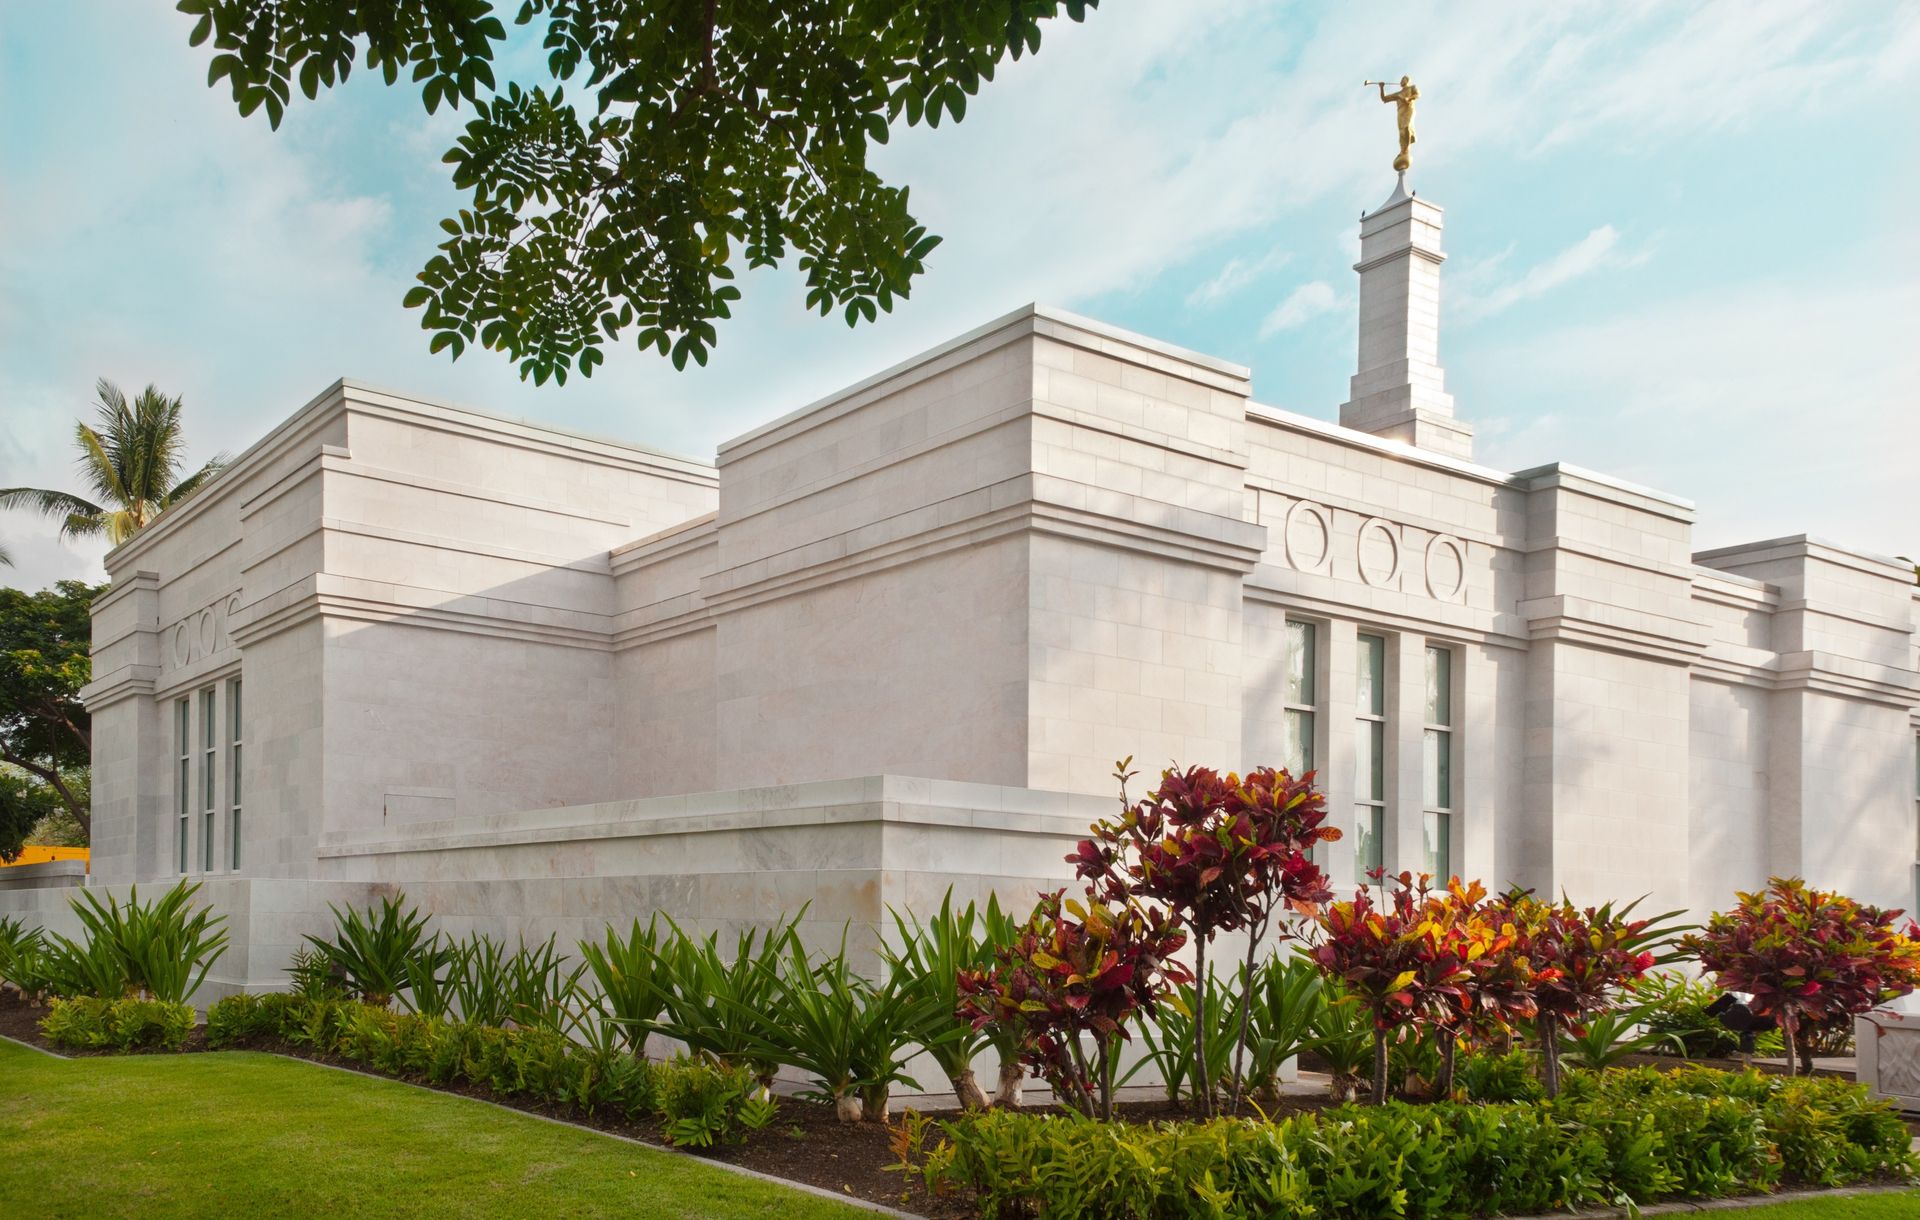 A side view of the Kona Hawaii Temple, including scenery and the exterior of the temple.